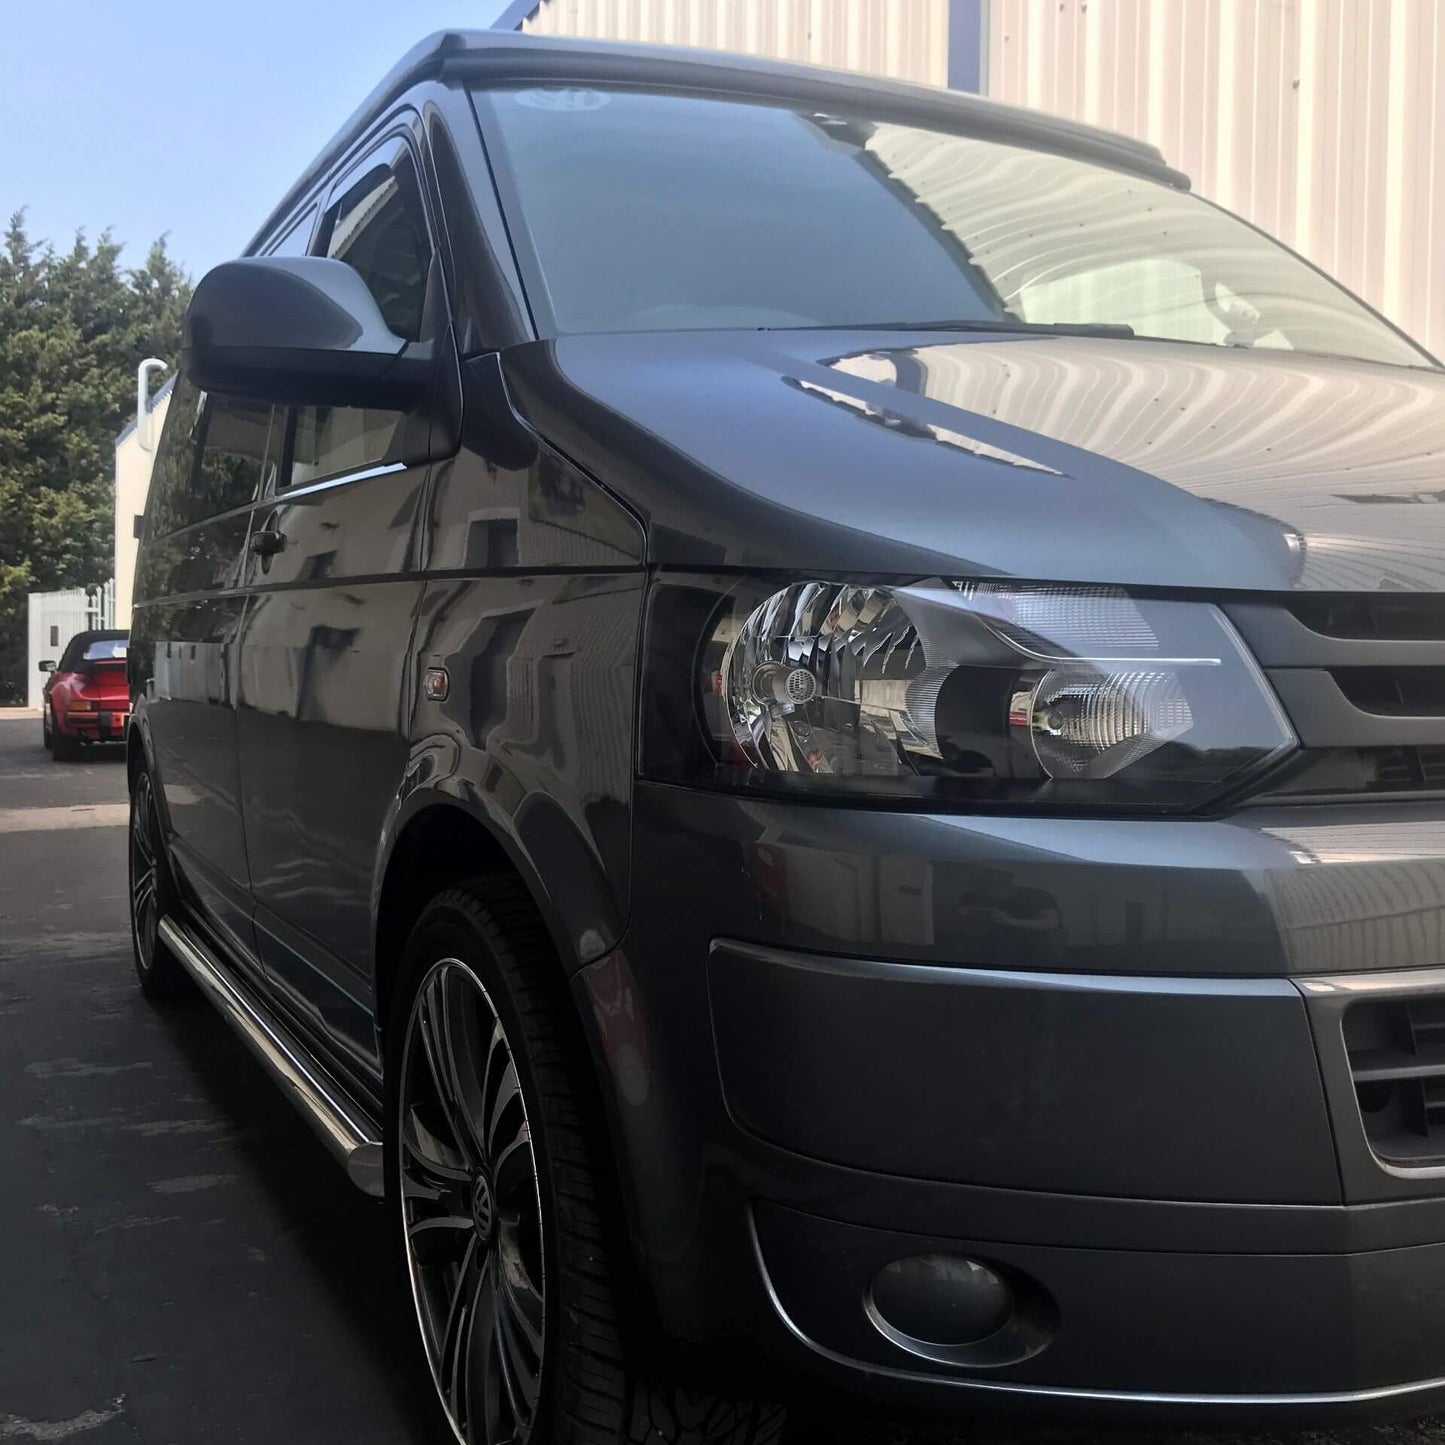 Stainless Steel Side Bars for Volkswagen Transporter T5 SWB -  - sold by Direct4x4